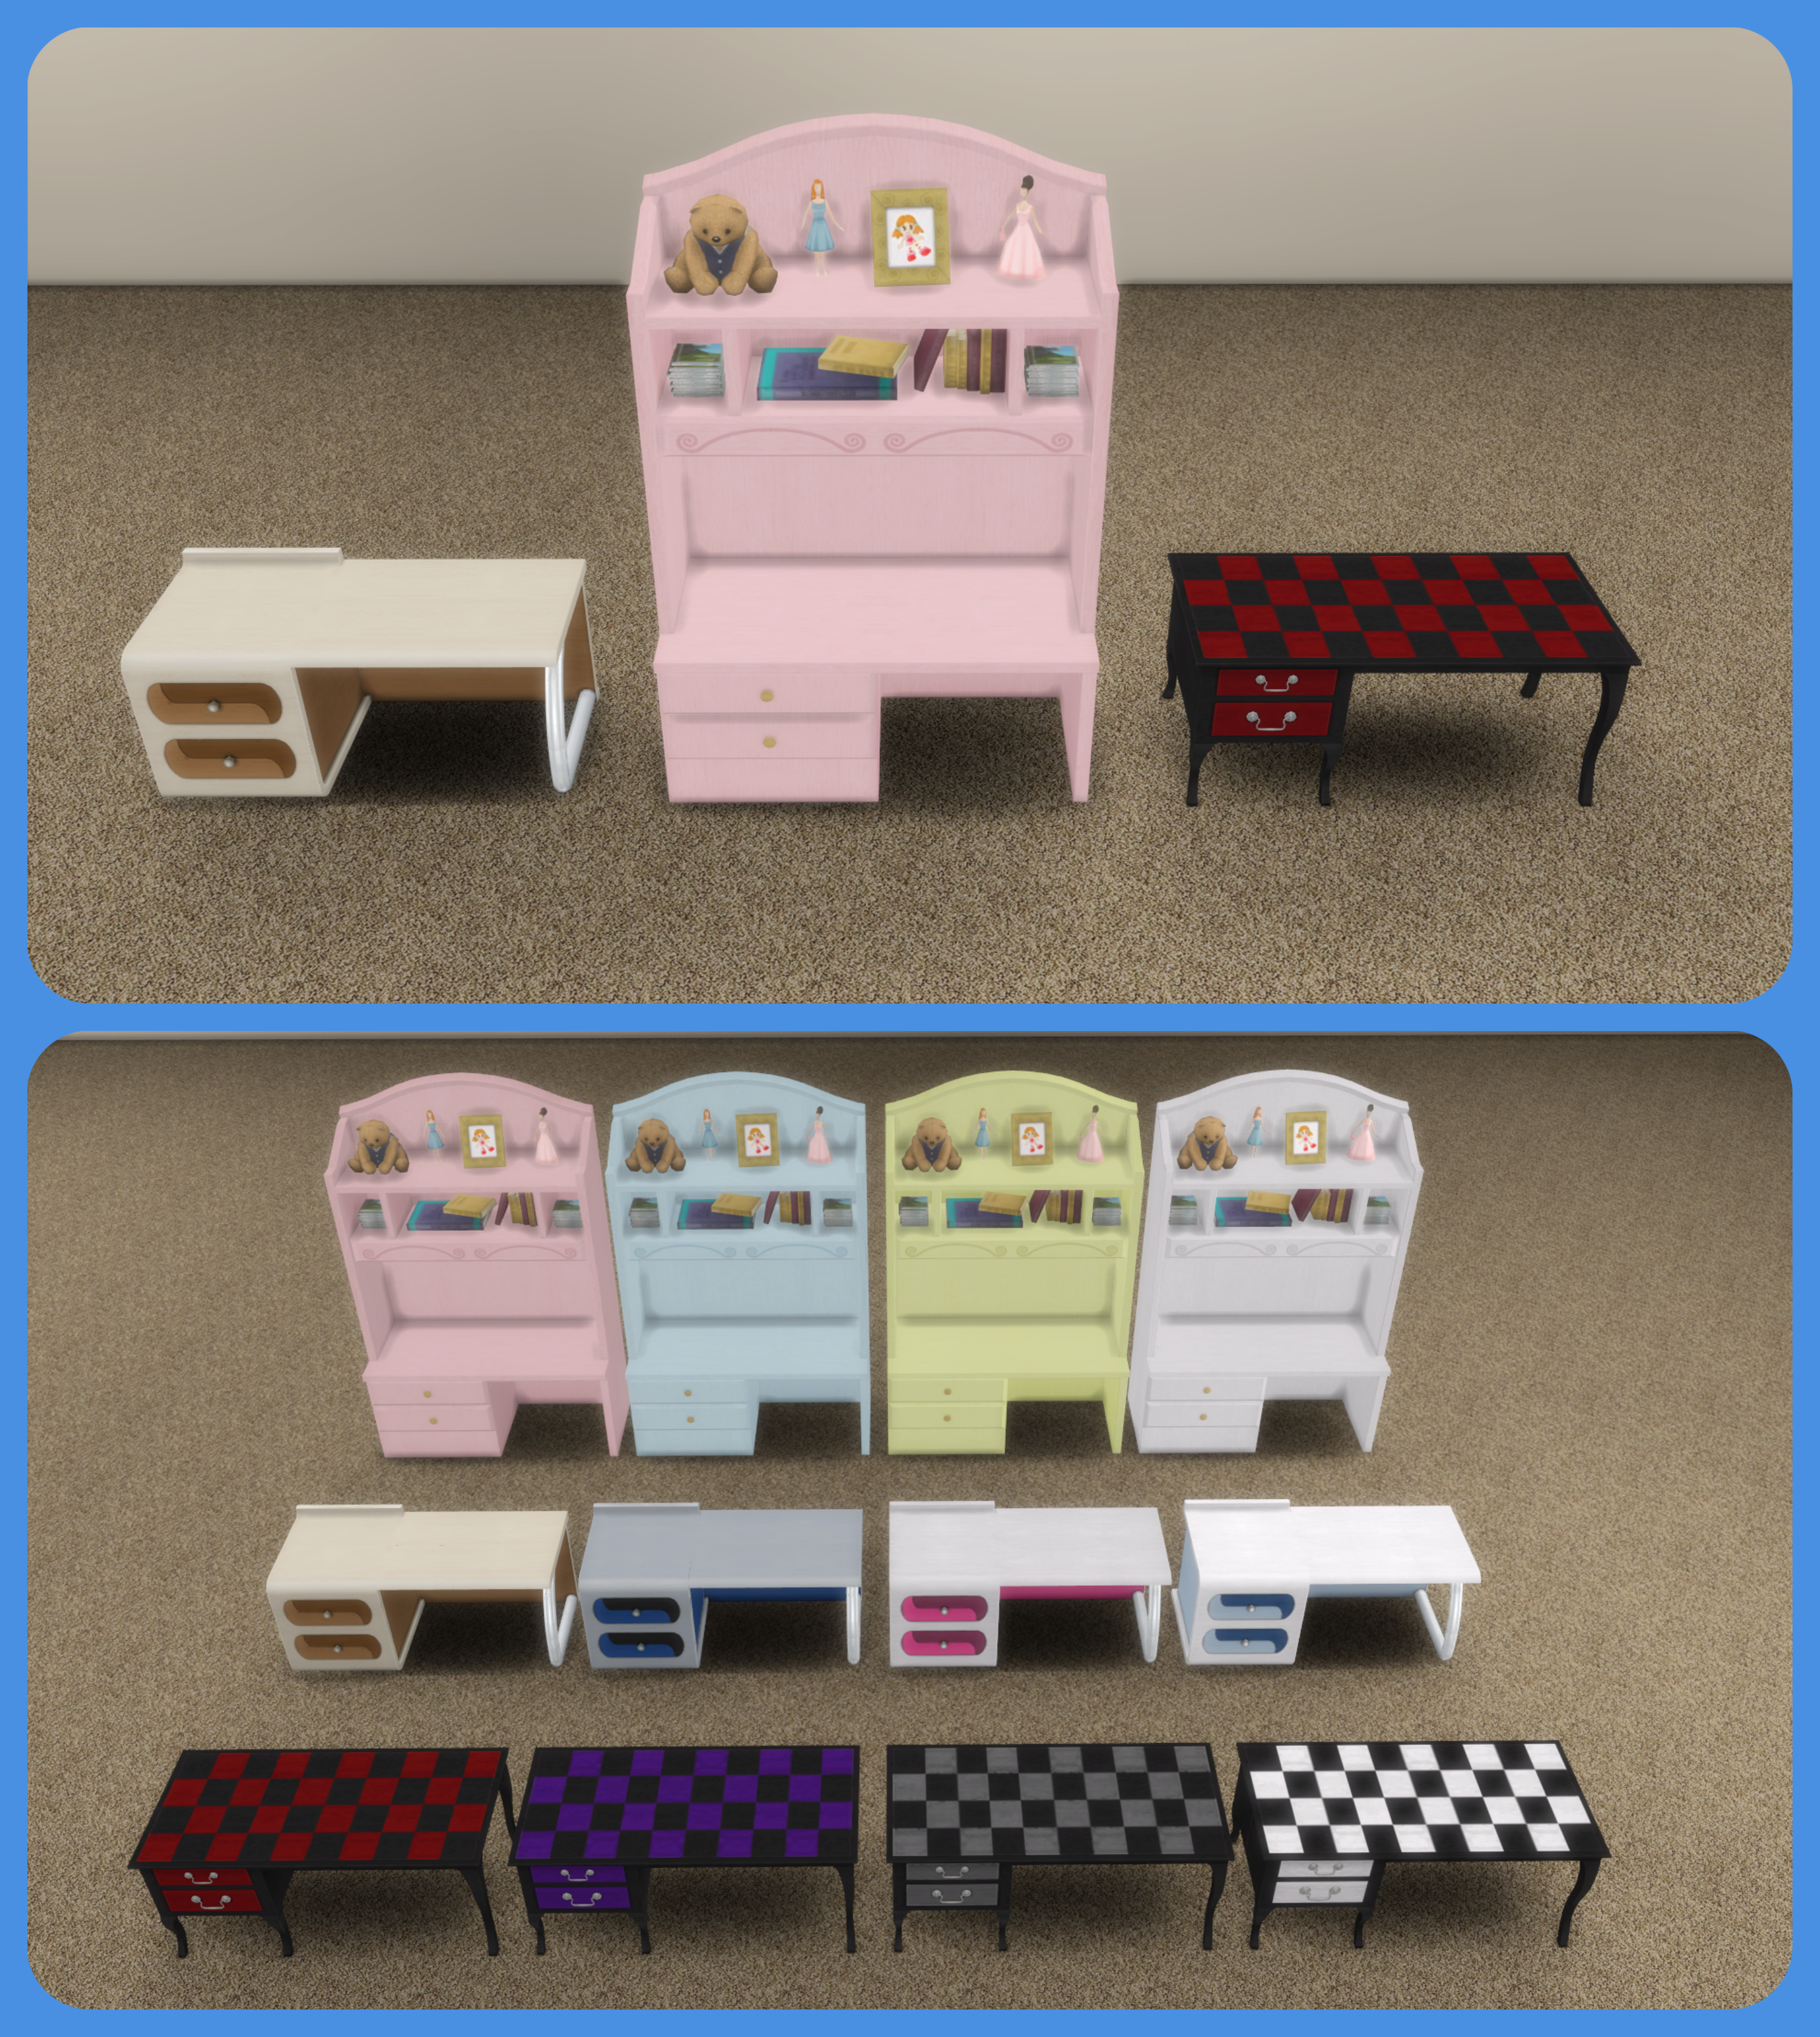 Mod The Sims - The Sims 4 Teen Style Stuff! *HIGH SCHOOL YEARS UPDATE*